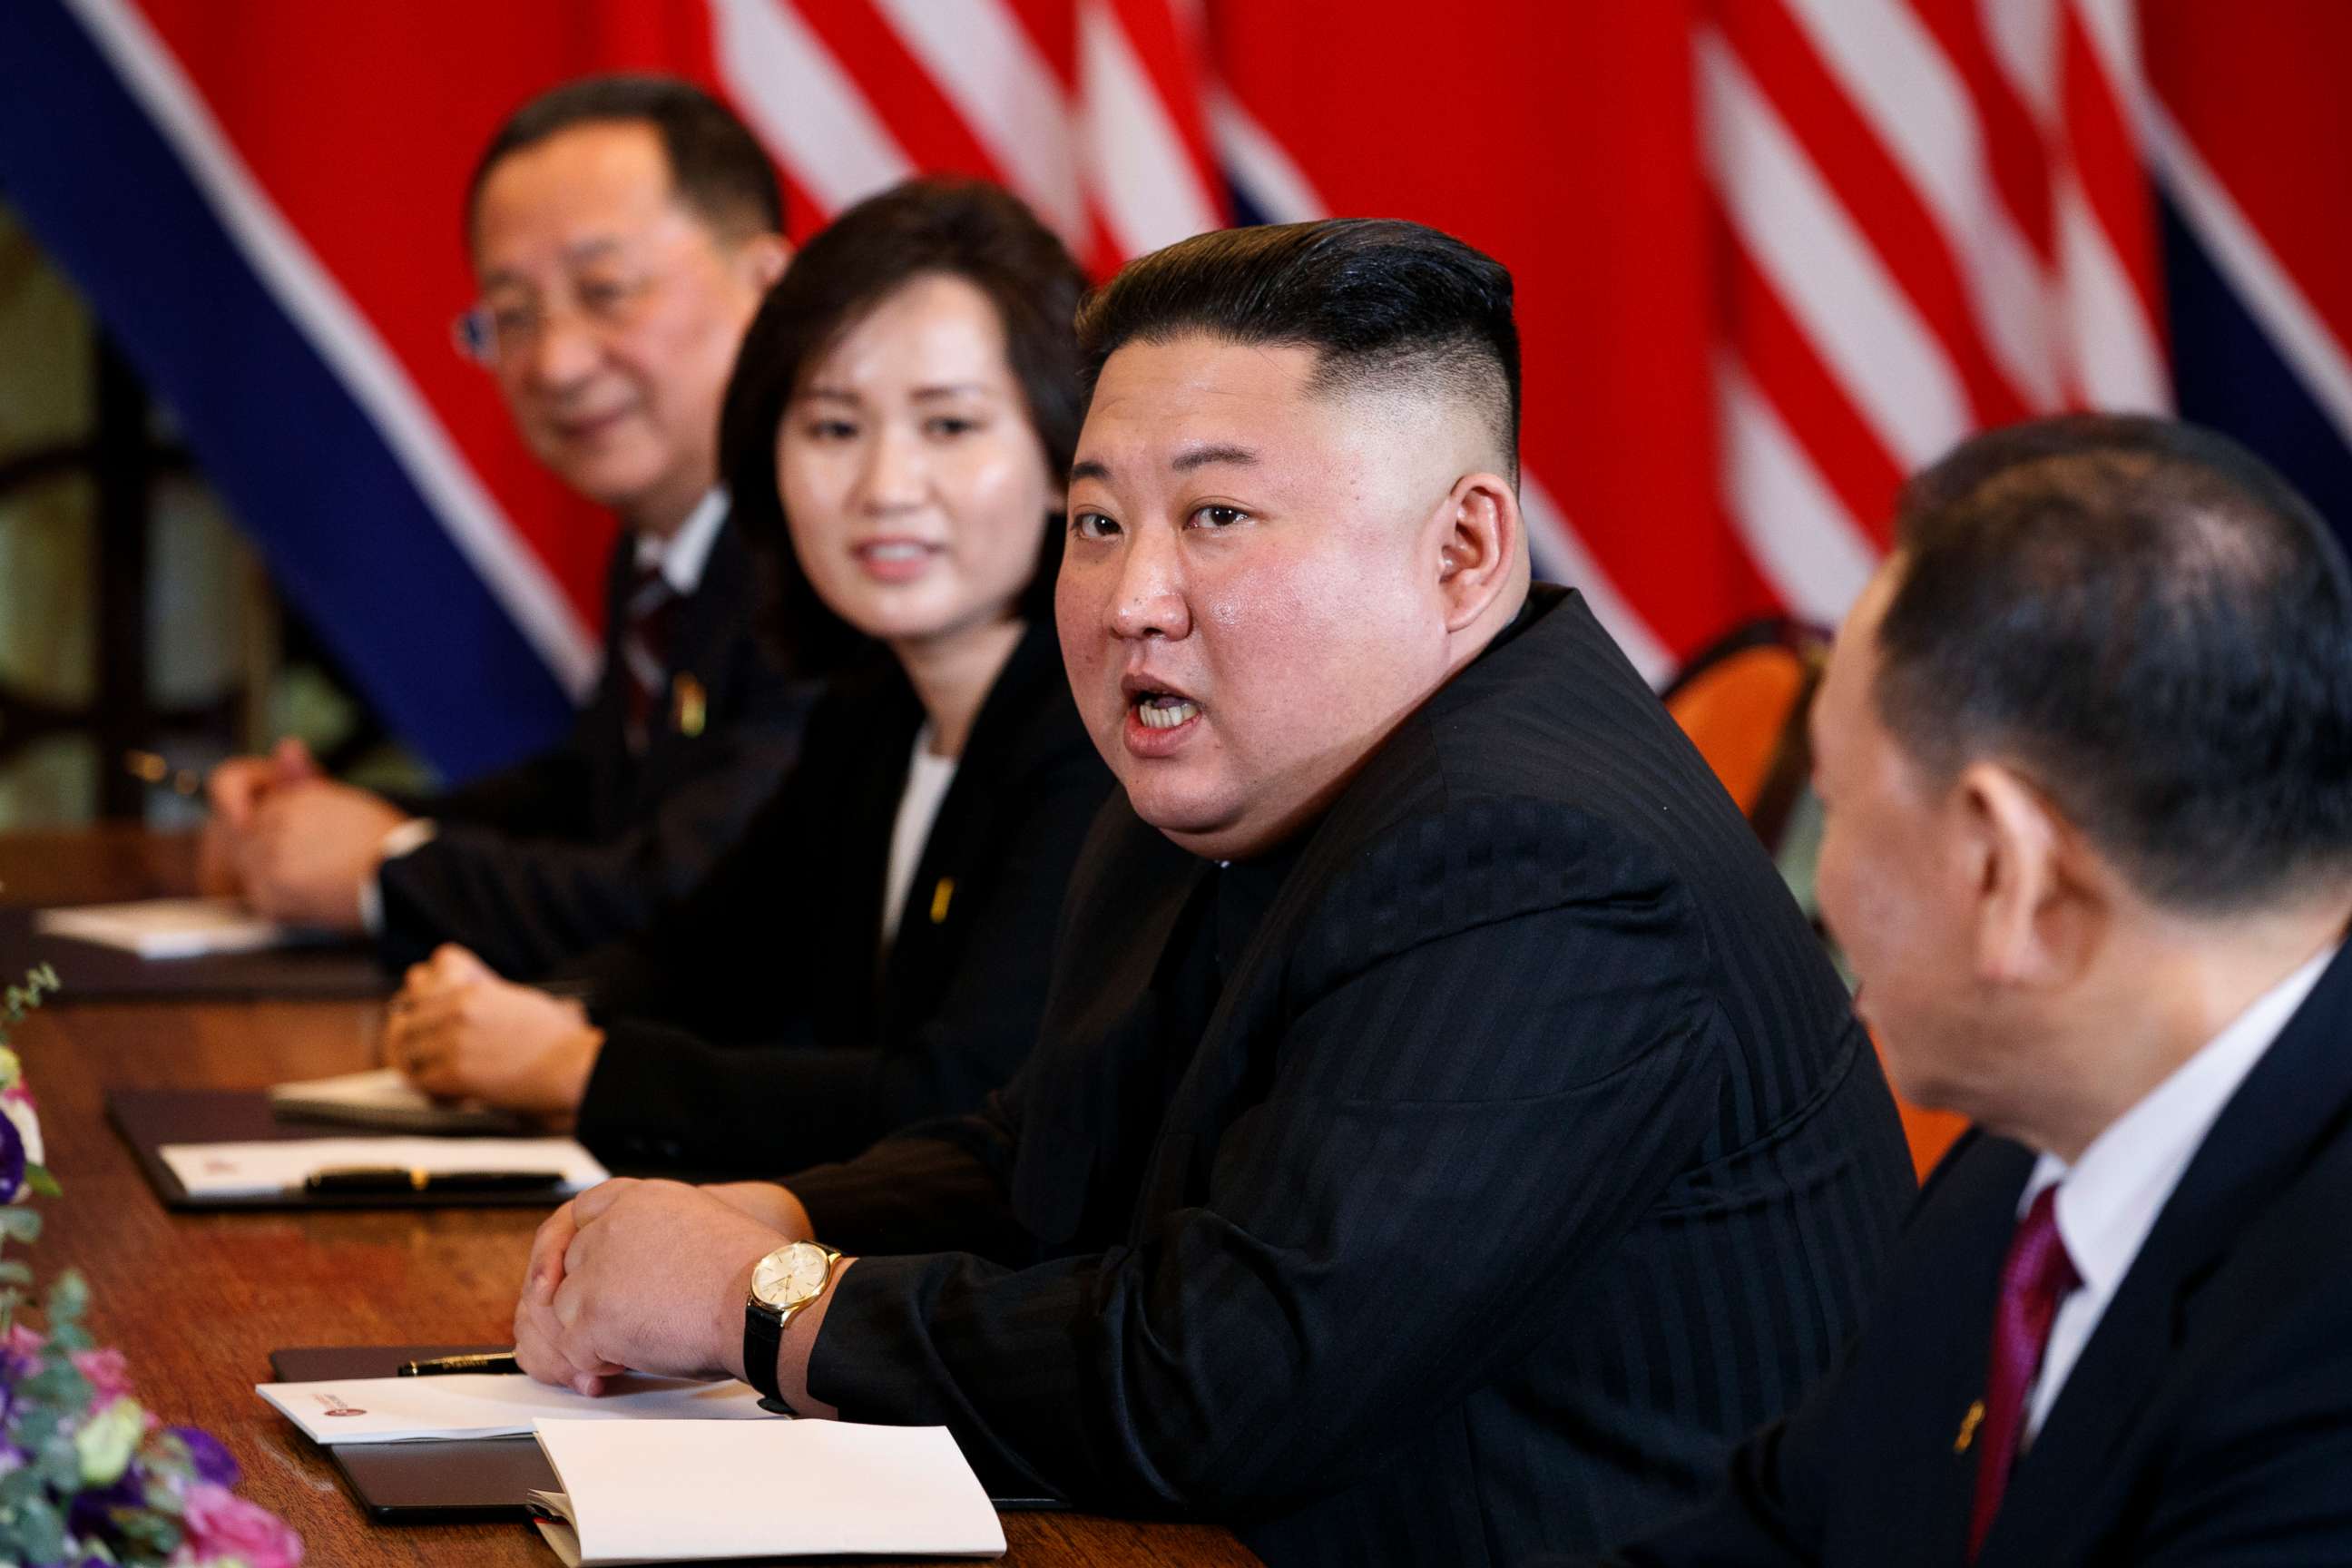 PHOTO: FILE - In this Feb. 28, 2019 file photo, North Korean leader Kim Jong Un answers a question from reporters during a meeting with President Donald Trump in Hanoi. 